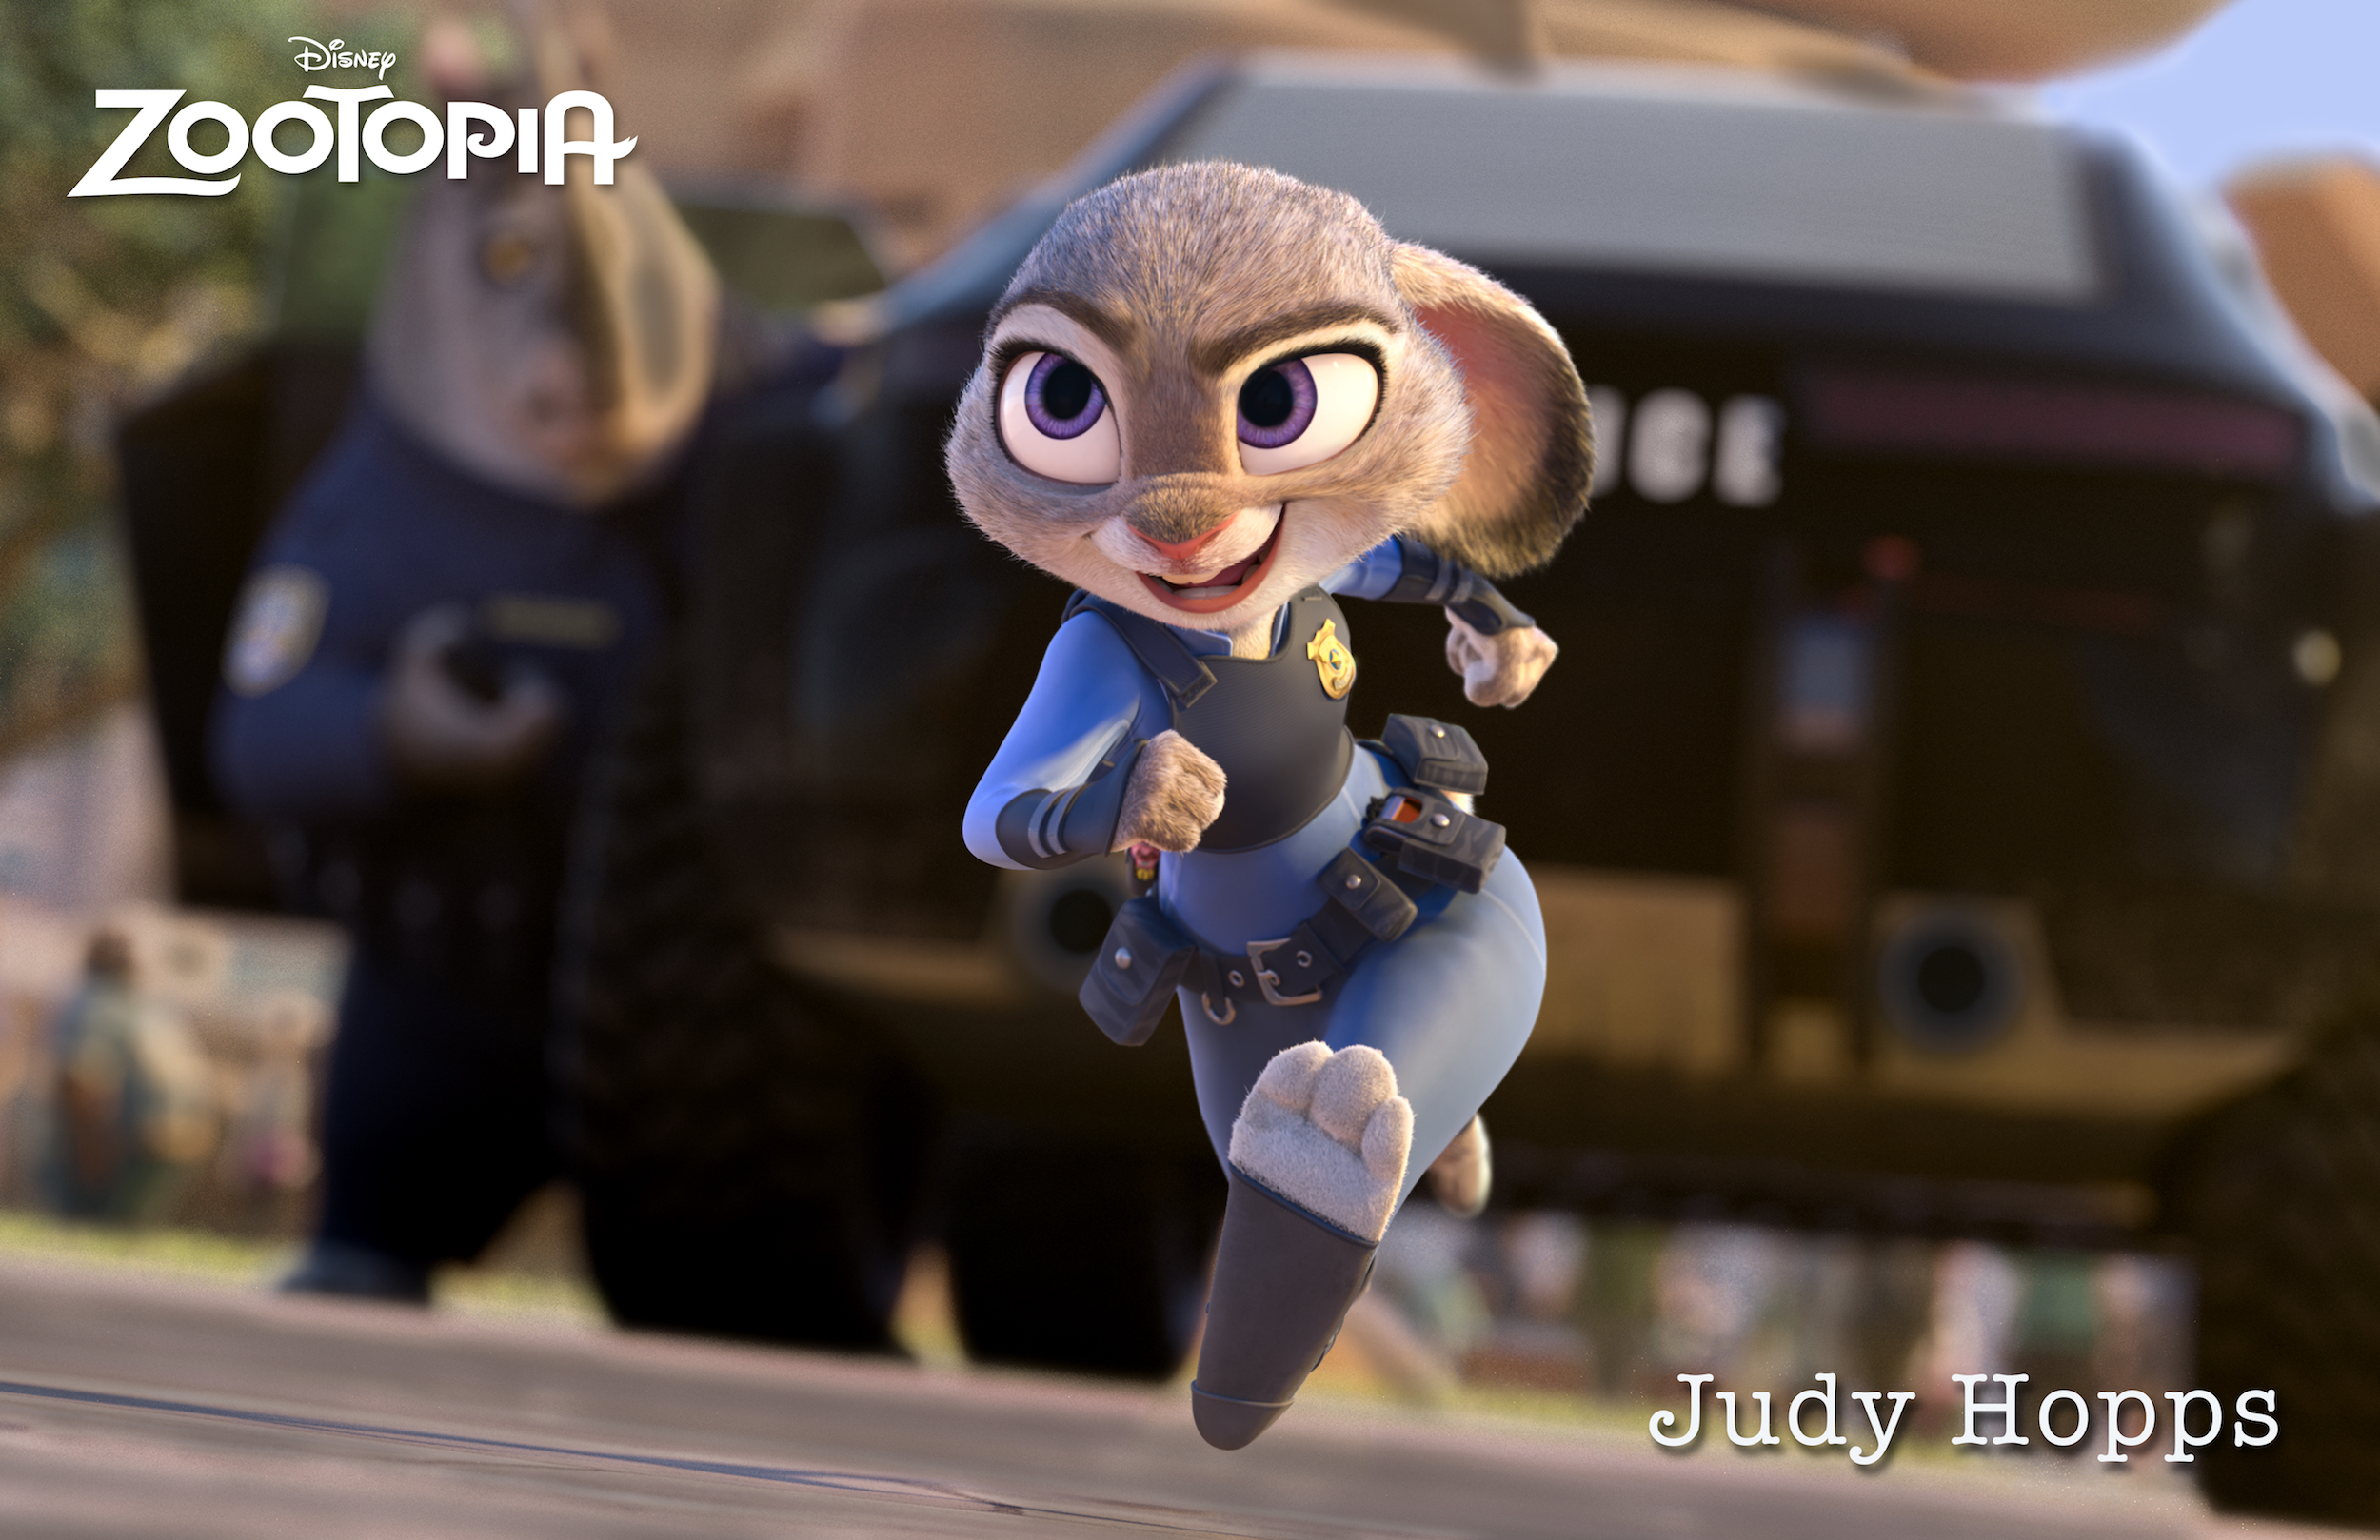 ZOOTOPIA – JUDY HOPPS, an optimistic bunny who’s new to Zootopia’s police department. ©2015 Disney. All Rights Reserved.